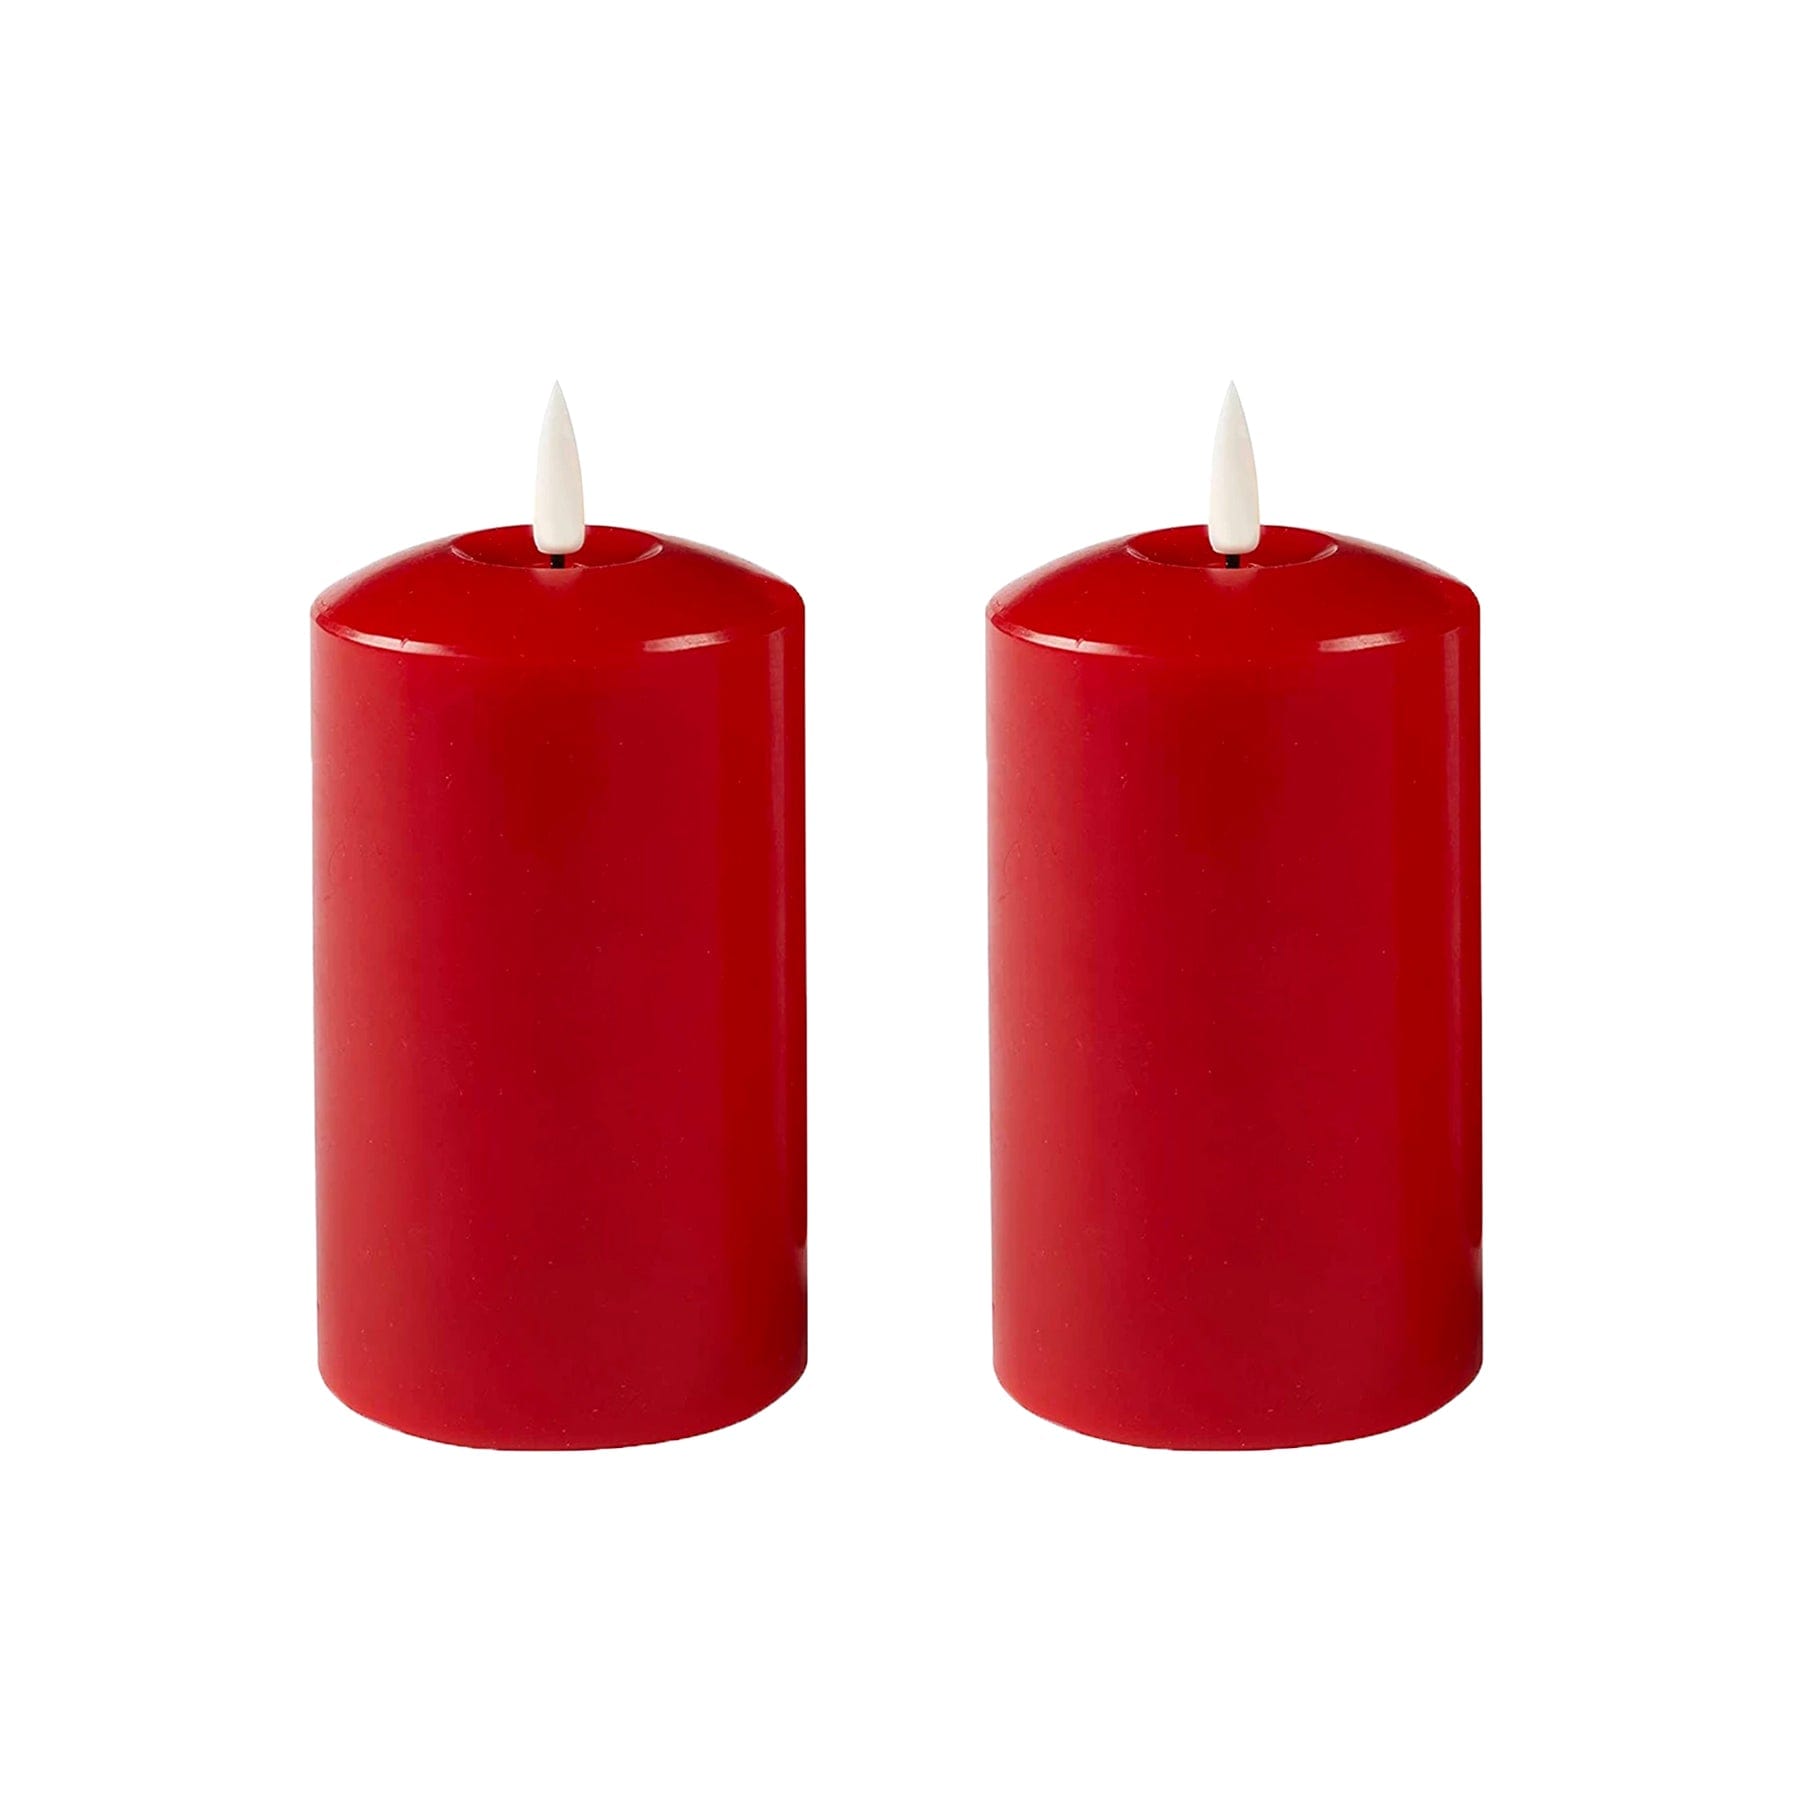 Lexi Lighting Christmas Table Decoration&Candle 18cm Set of 2 LED Red Wax Pillar Candles - 3 Size Options LLCA02R